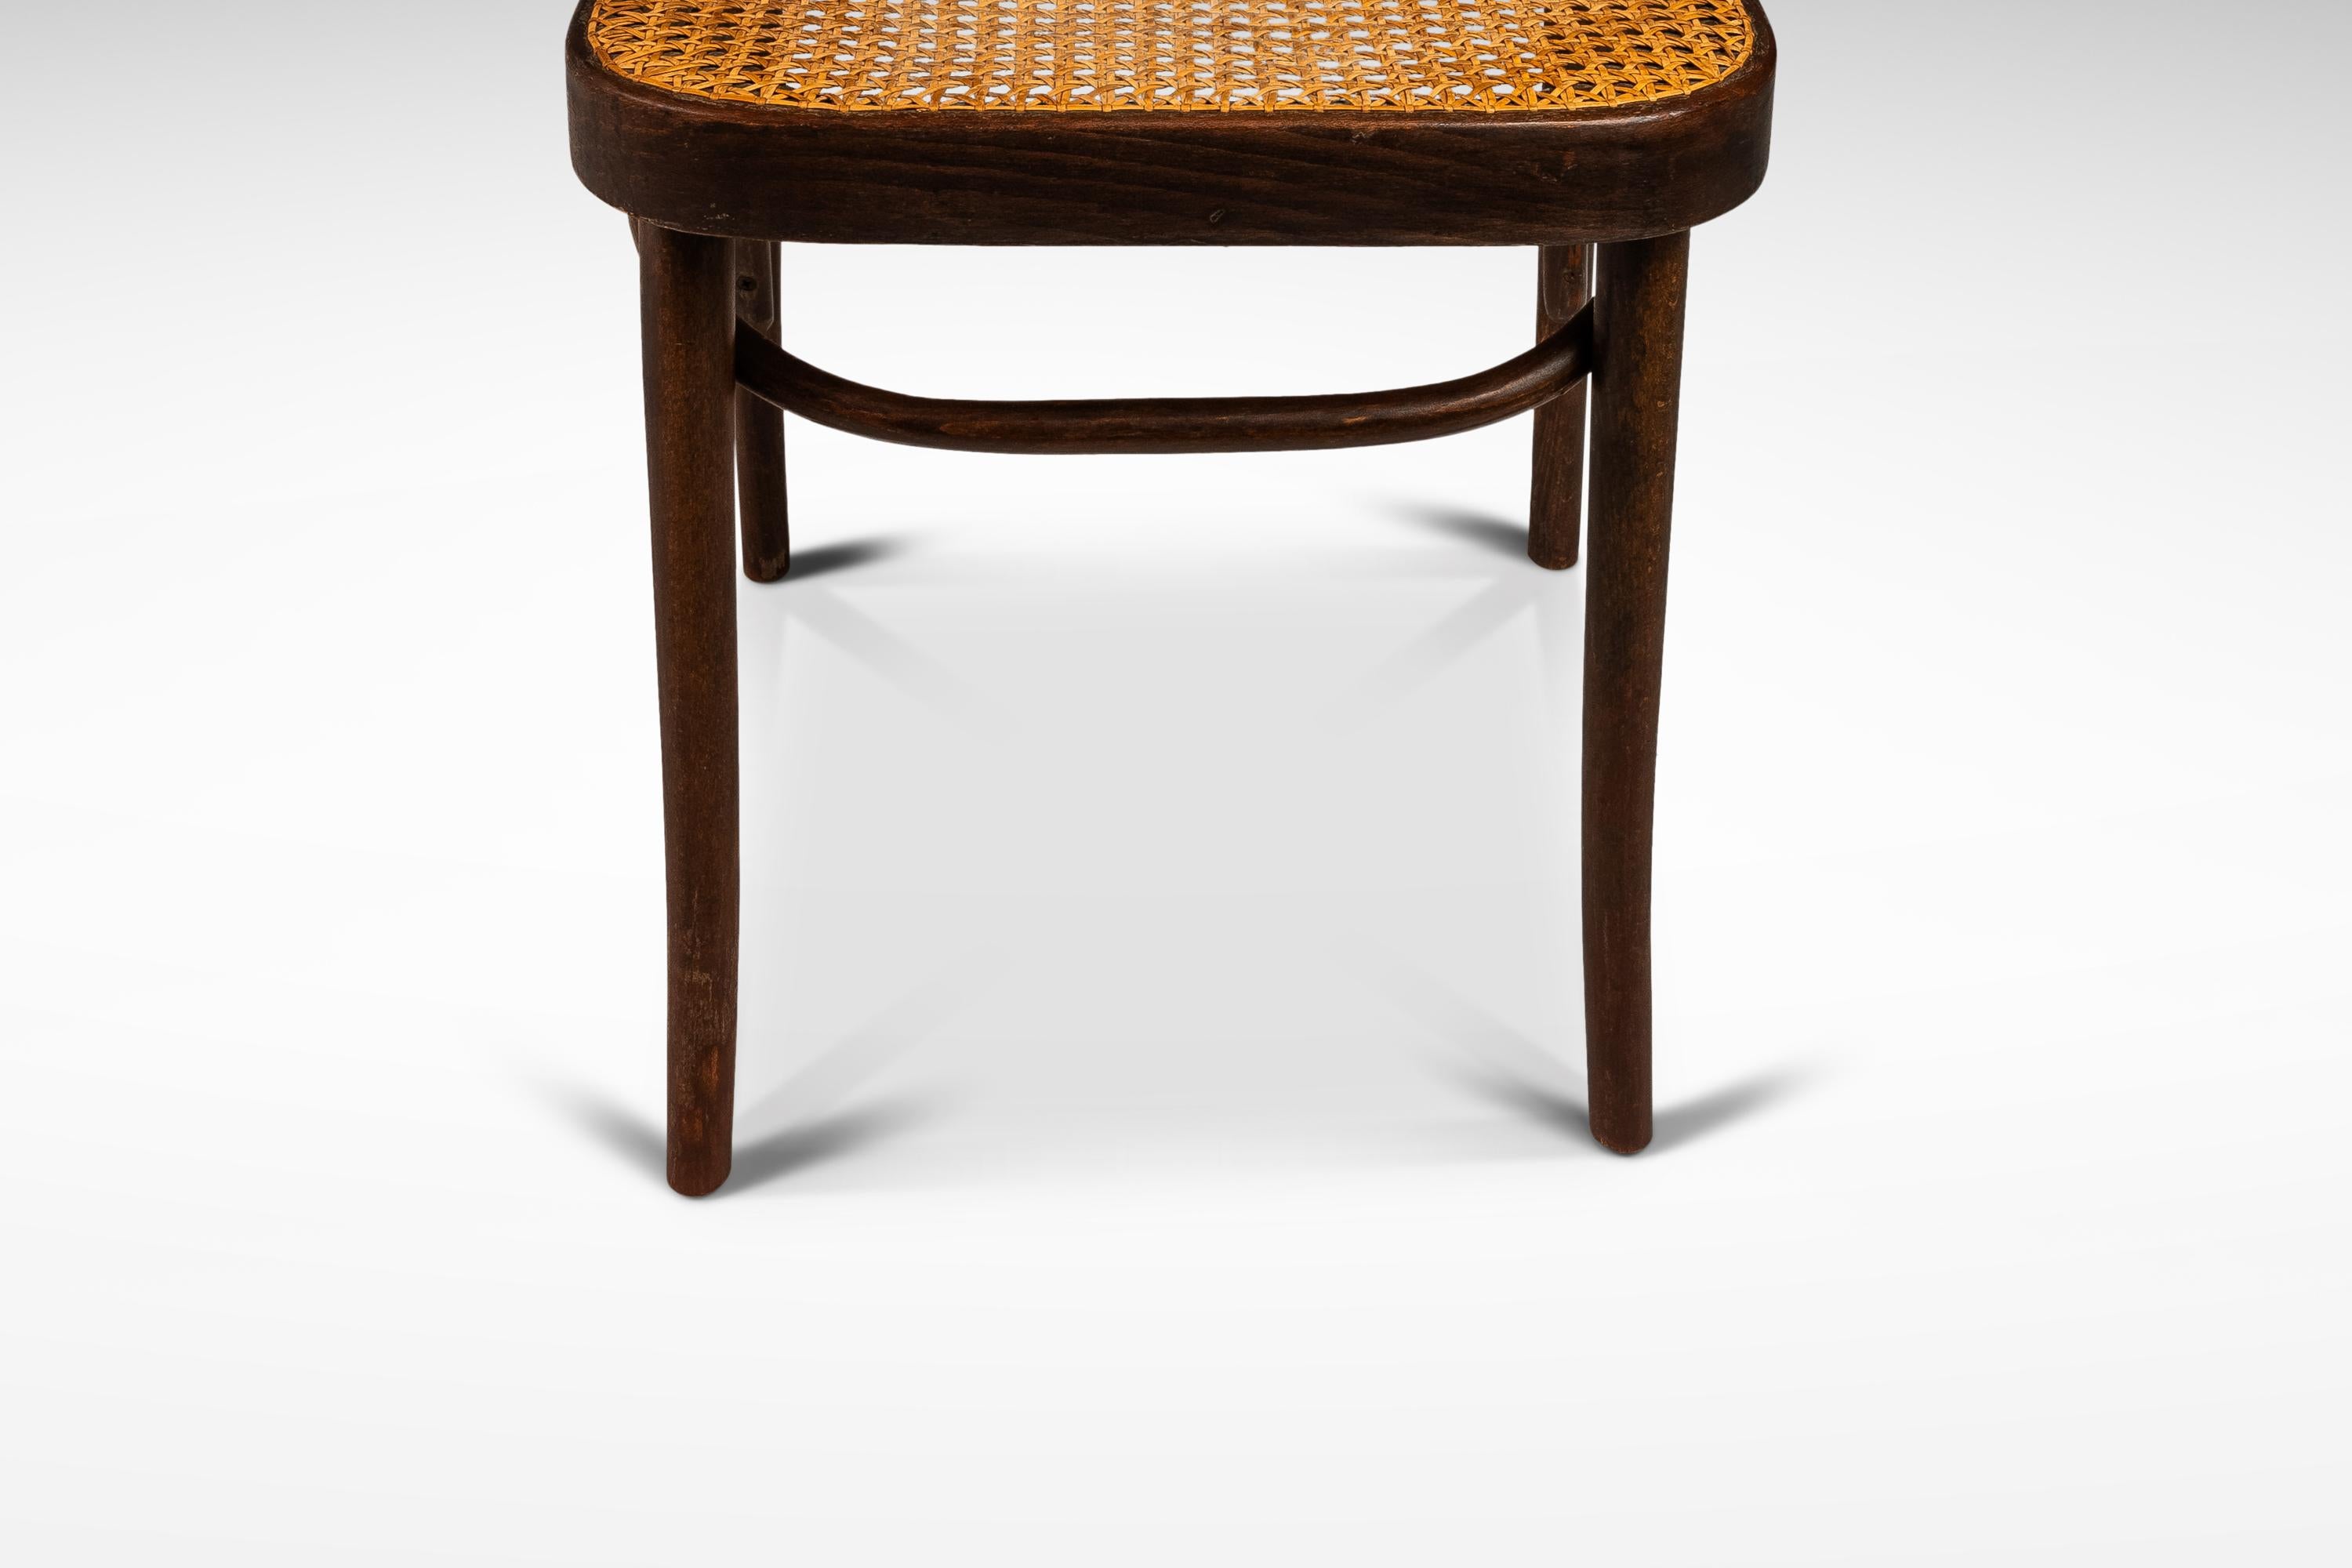 Bentwood Prague Model 811 Chair in Walnut by Josef Frank, Poland, c. 1960s For Sale 6